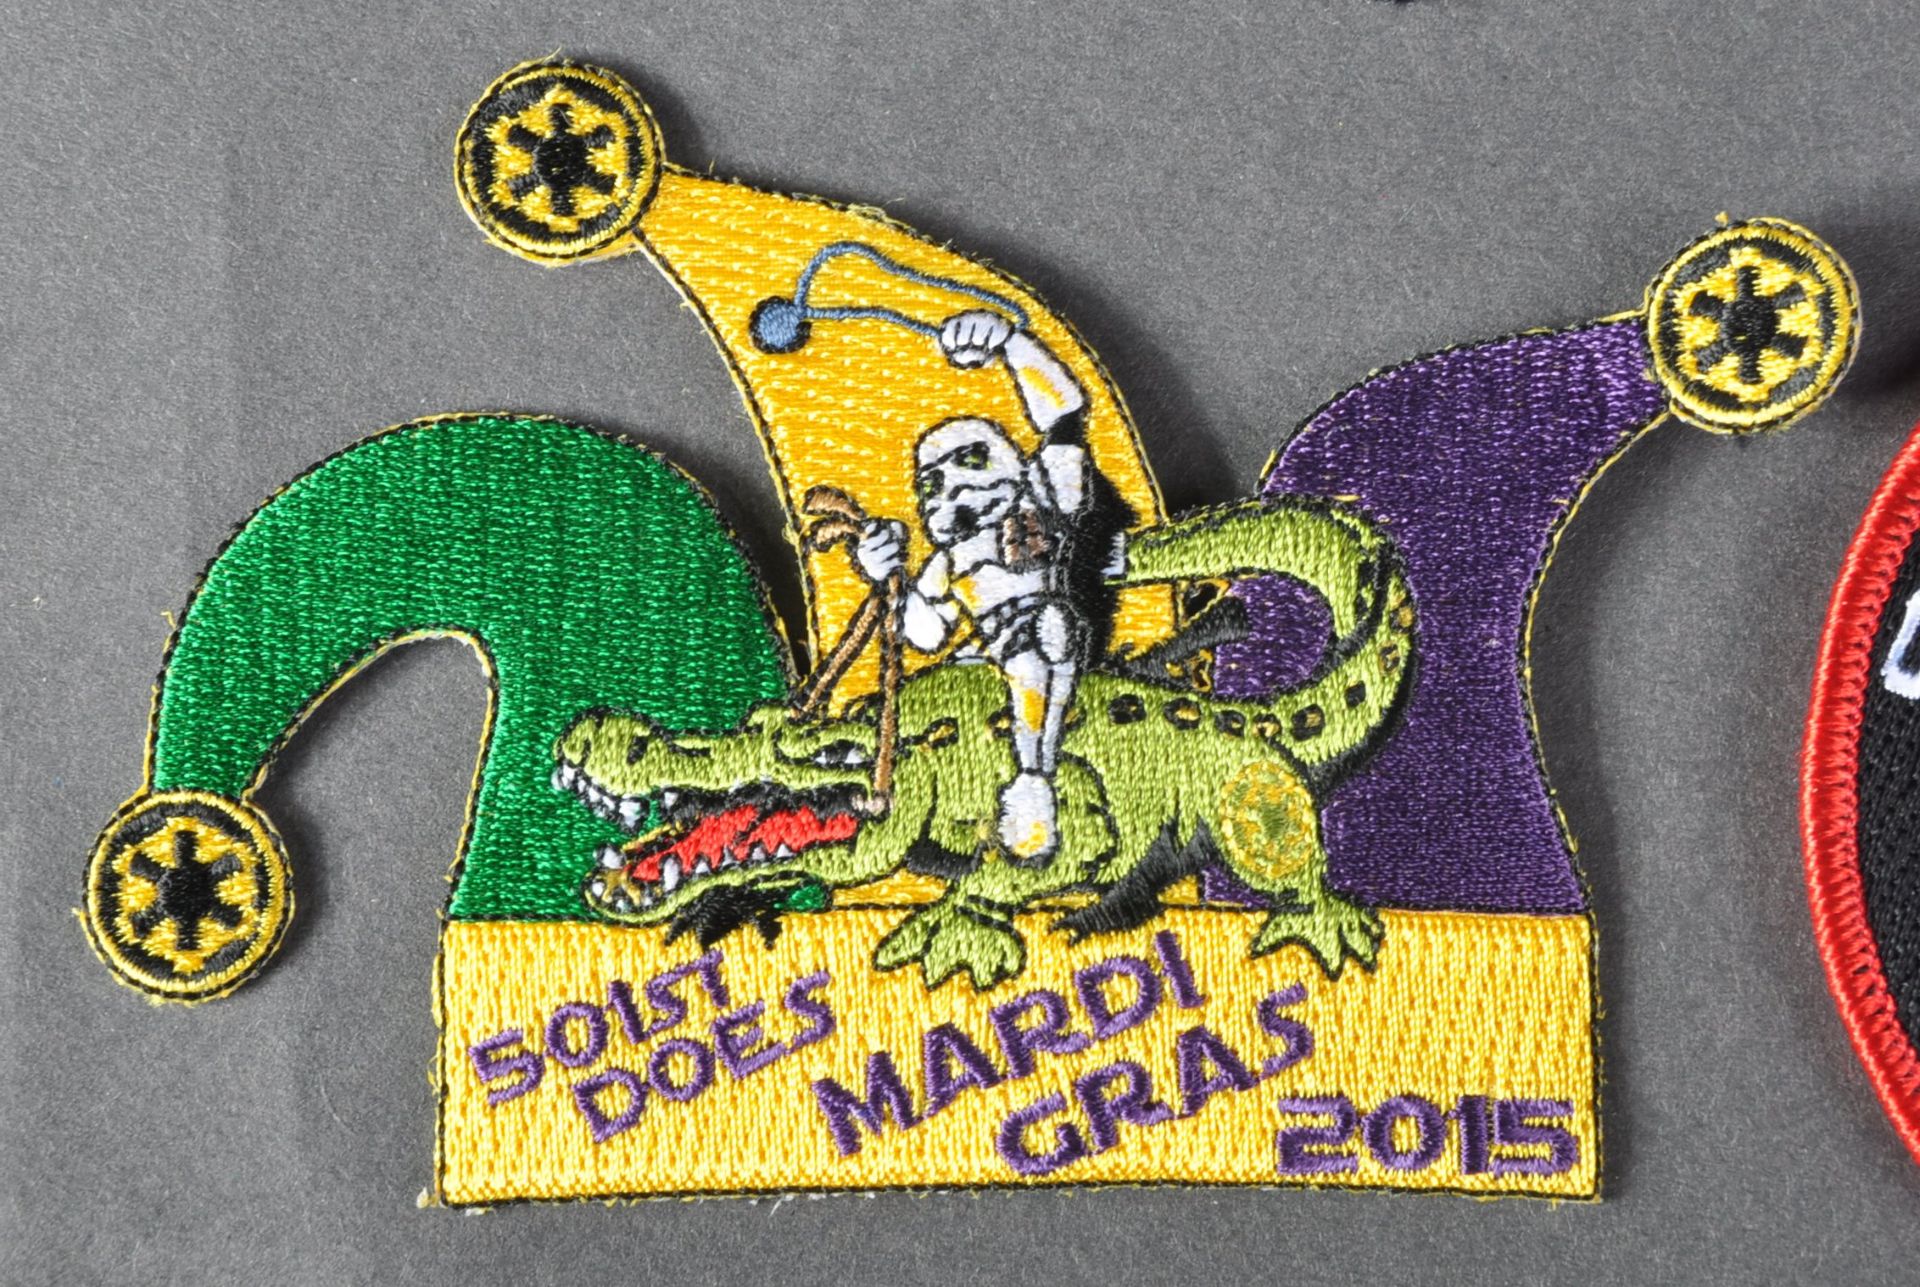 ESTATE OF JEREMY BULLOCH - STAR WARS - CLOTH PATCHES - Image 2 of 8